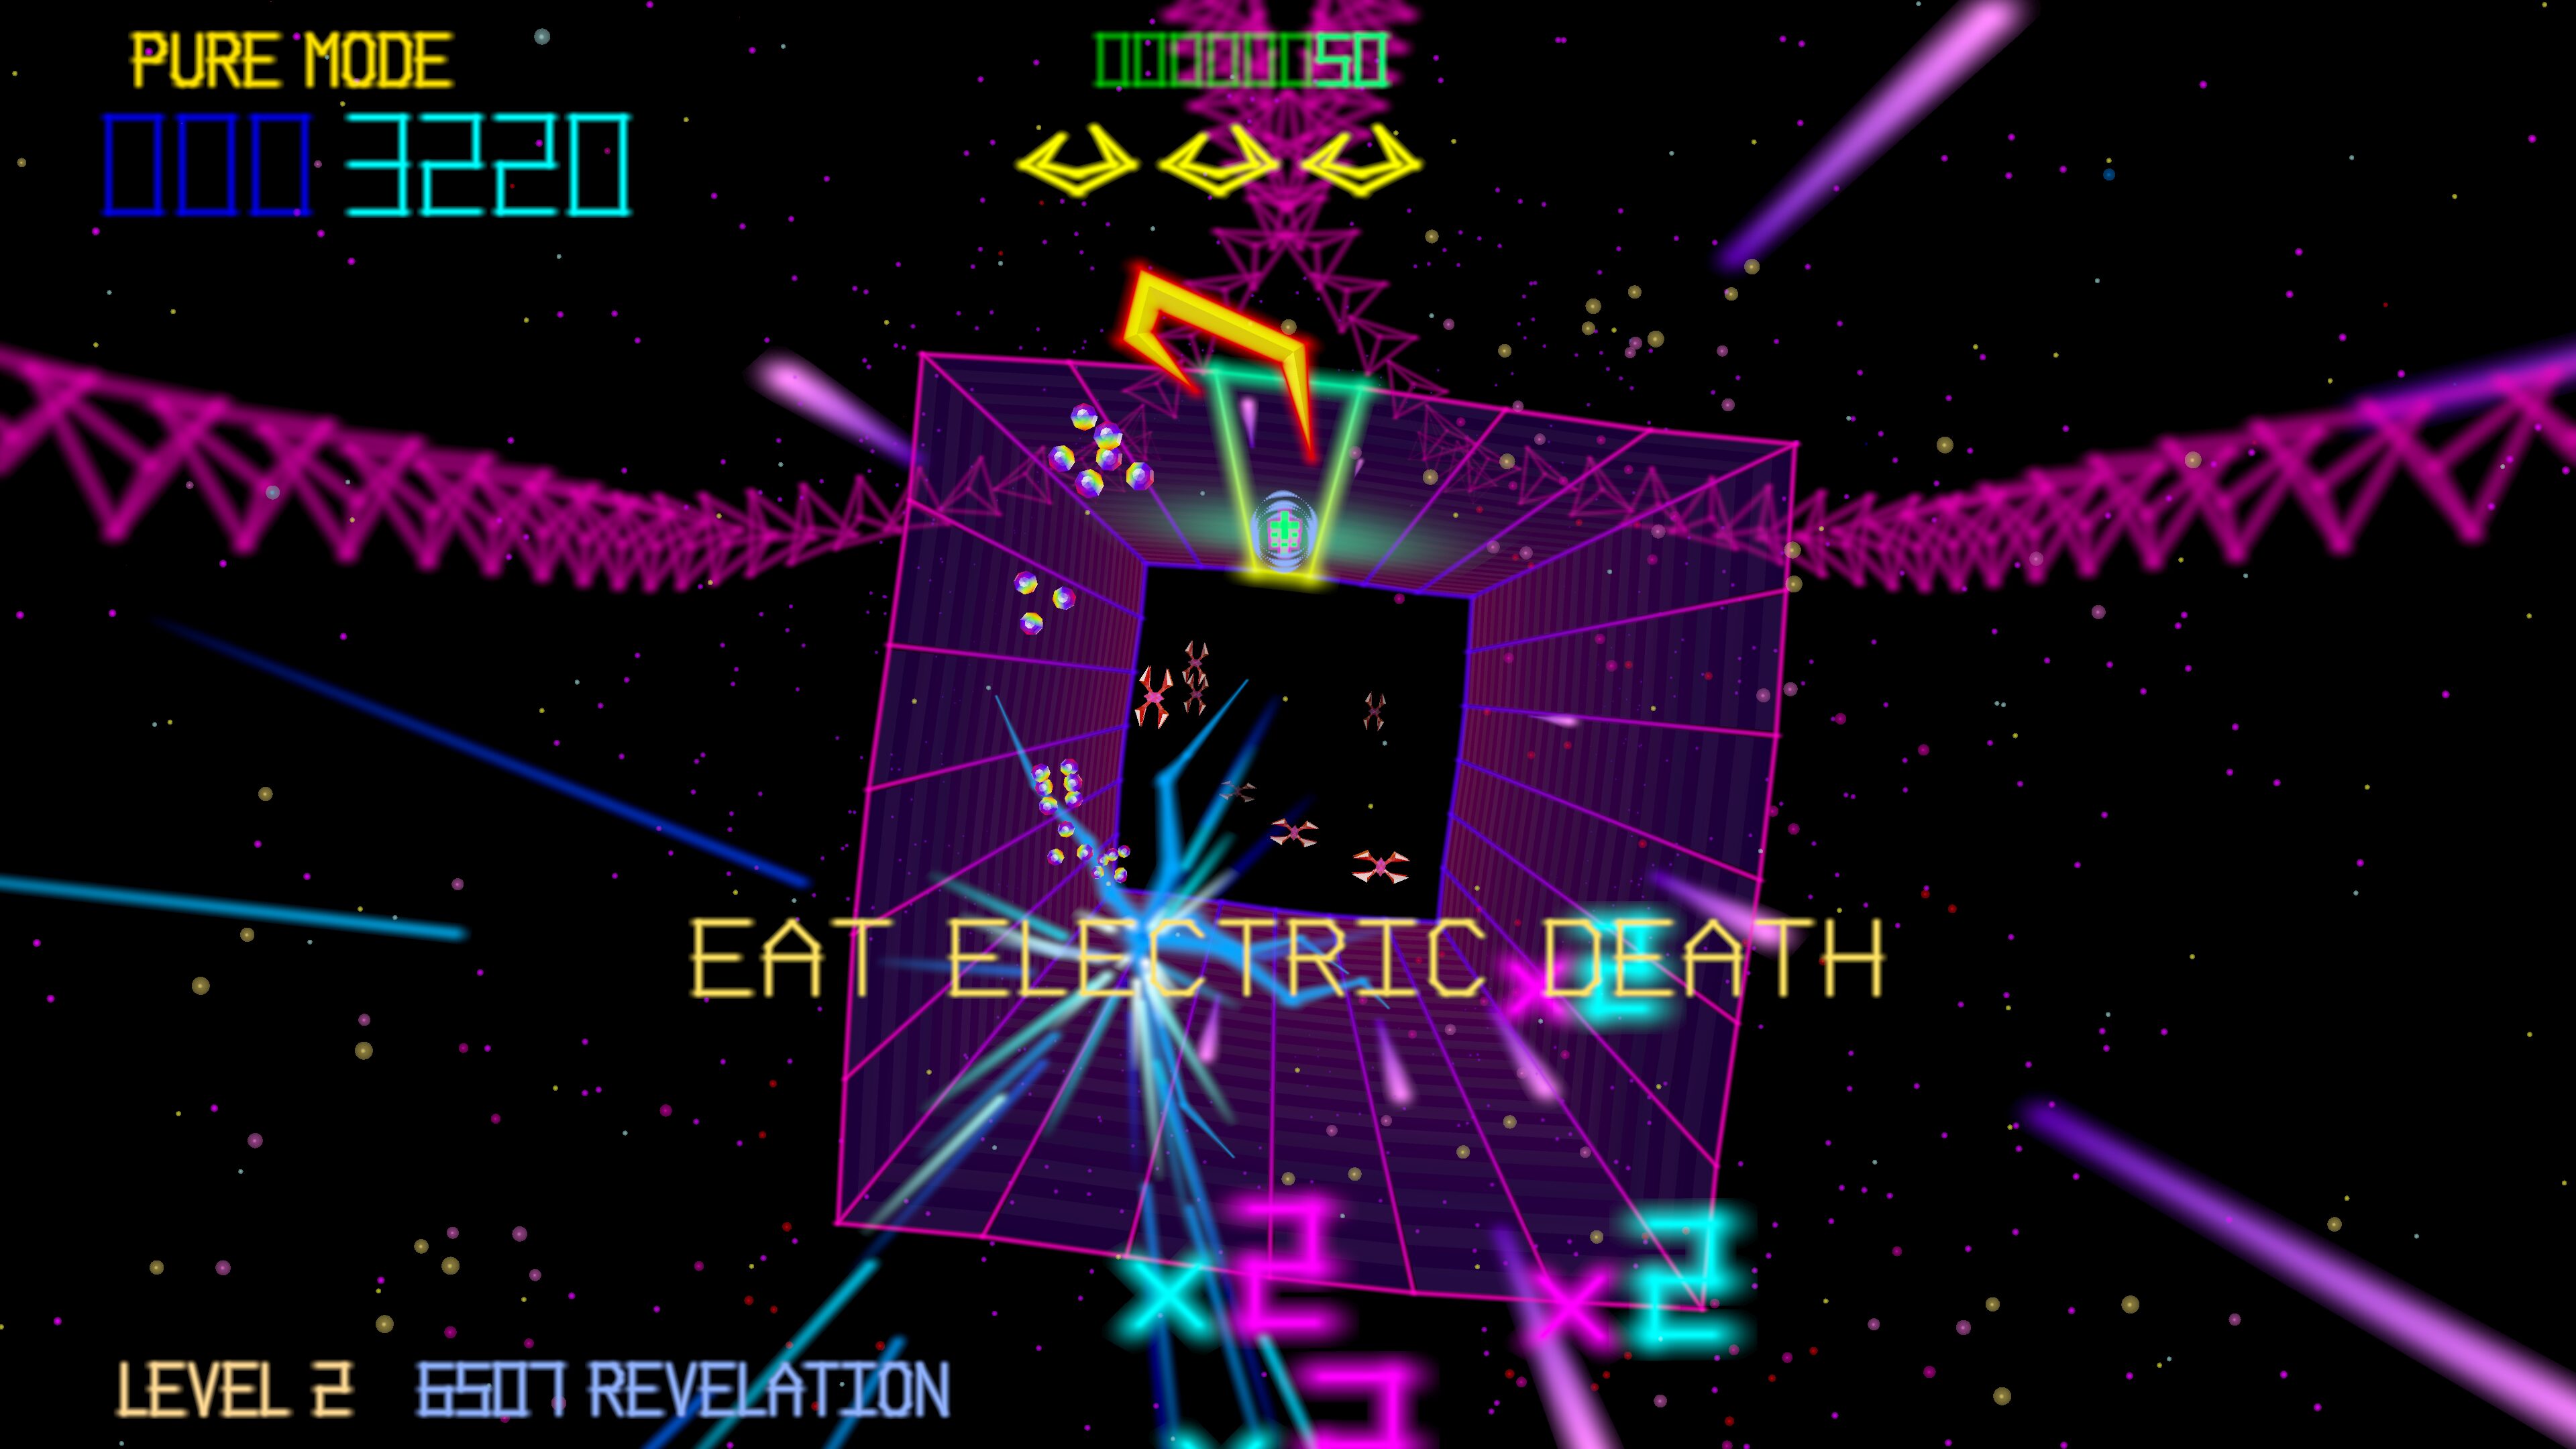 Arcade shooter Tempest 4000 drops July 17th